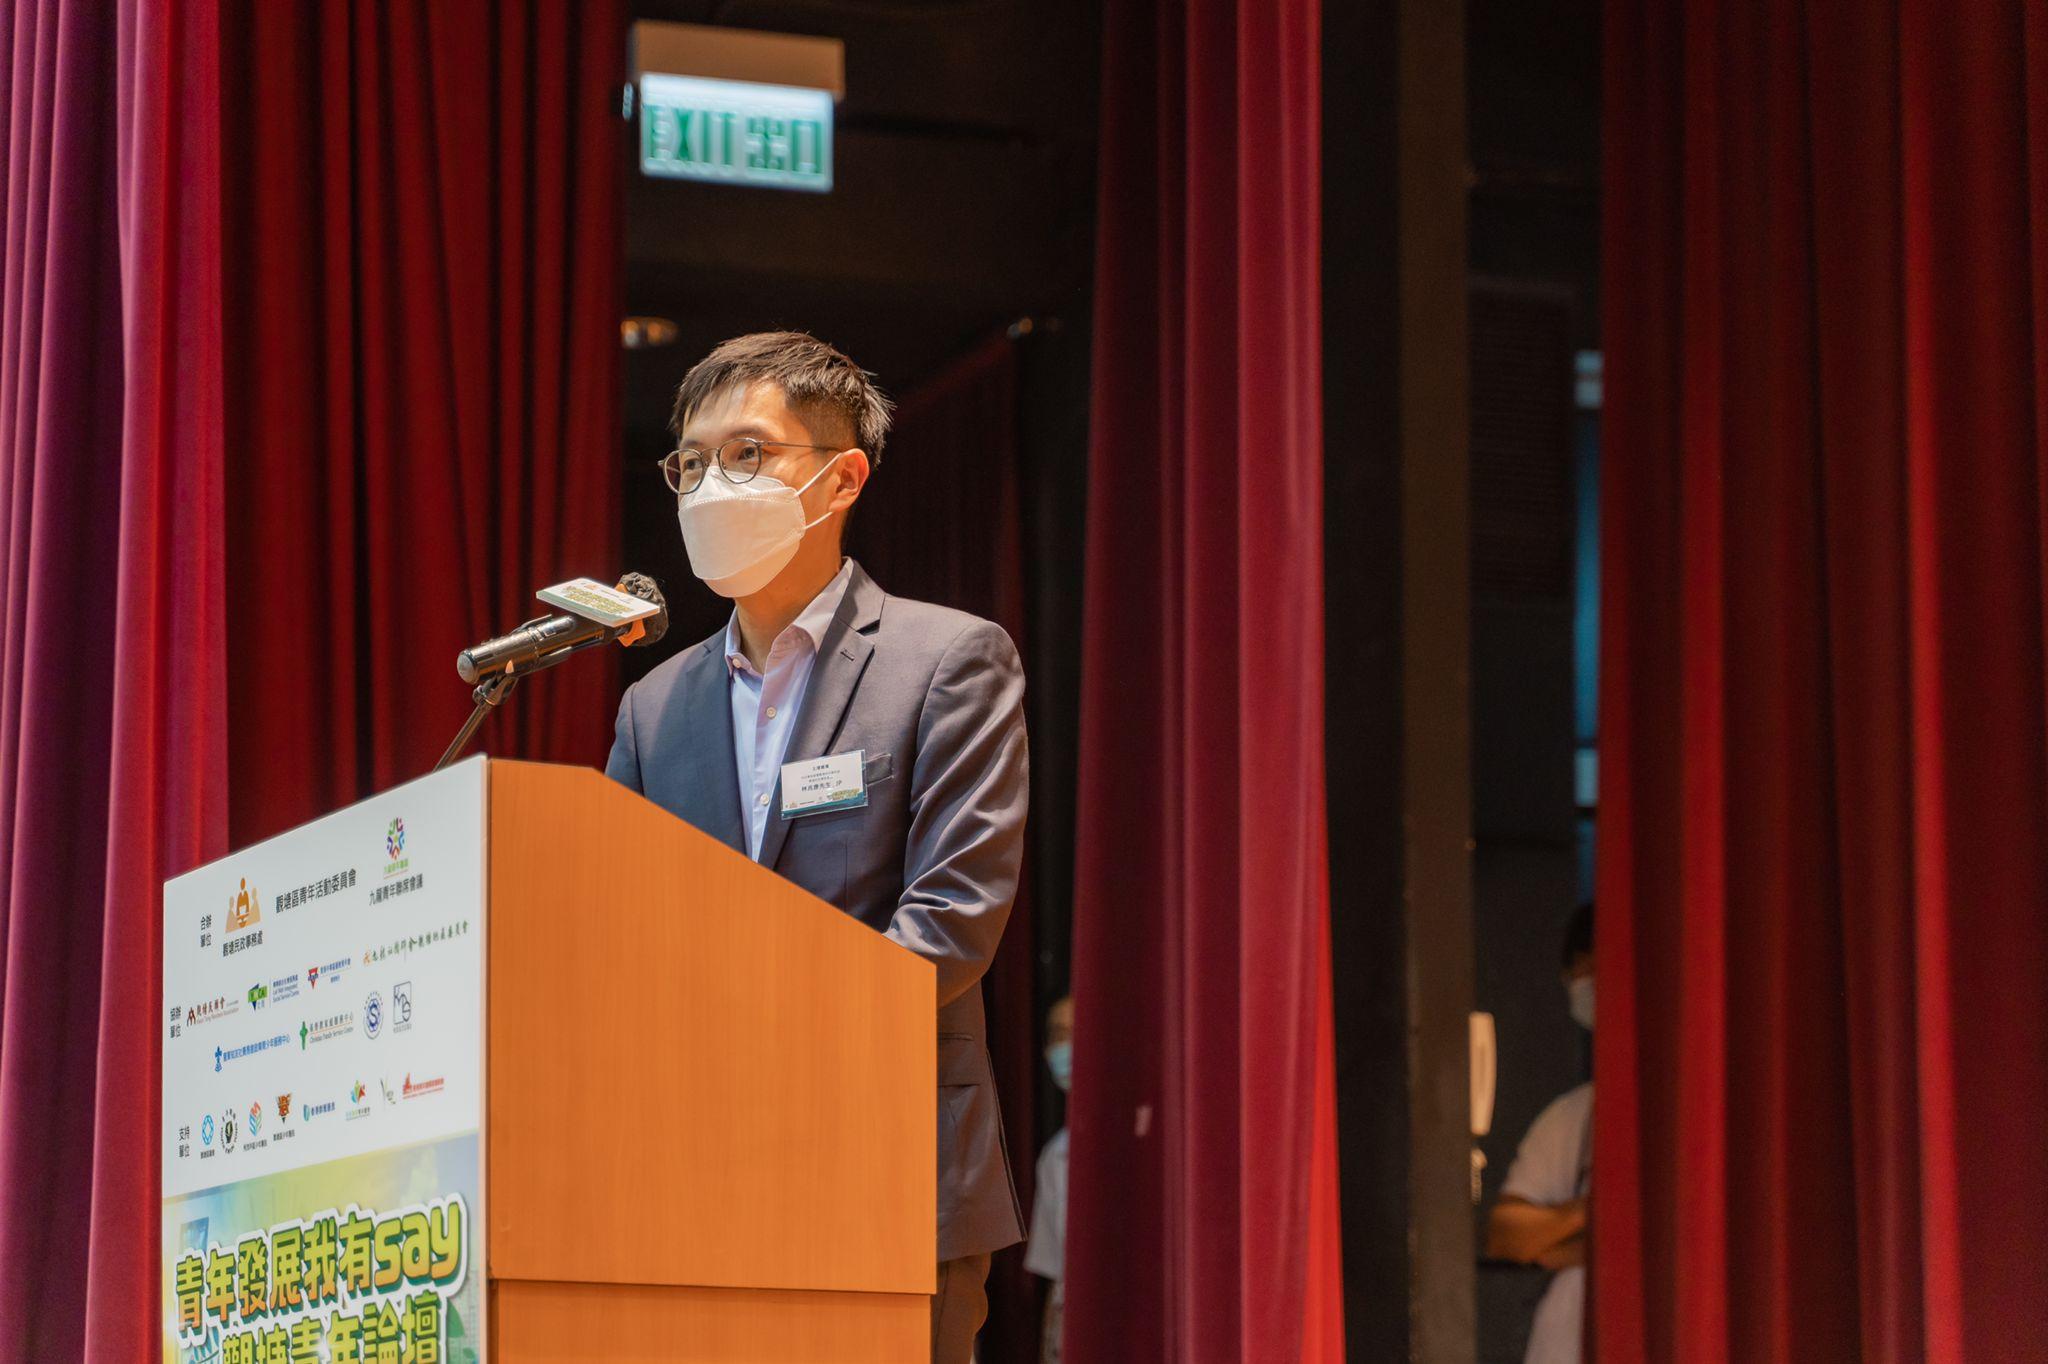 The Kwun Tong District Office, the Kwun Tong District Youth Programme Committee and the Kowloon Youths Joint Conference jointly organised the “Our Say in Youth Development – Kwun Tong Youth Forum” at the auditorium of the Christian Family Service Centre in Kwun Tong this afternoon (August 27). Picture shows the District Officer (Kwun Tong), Mr Andy Lam, delivering a welcoming speech.